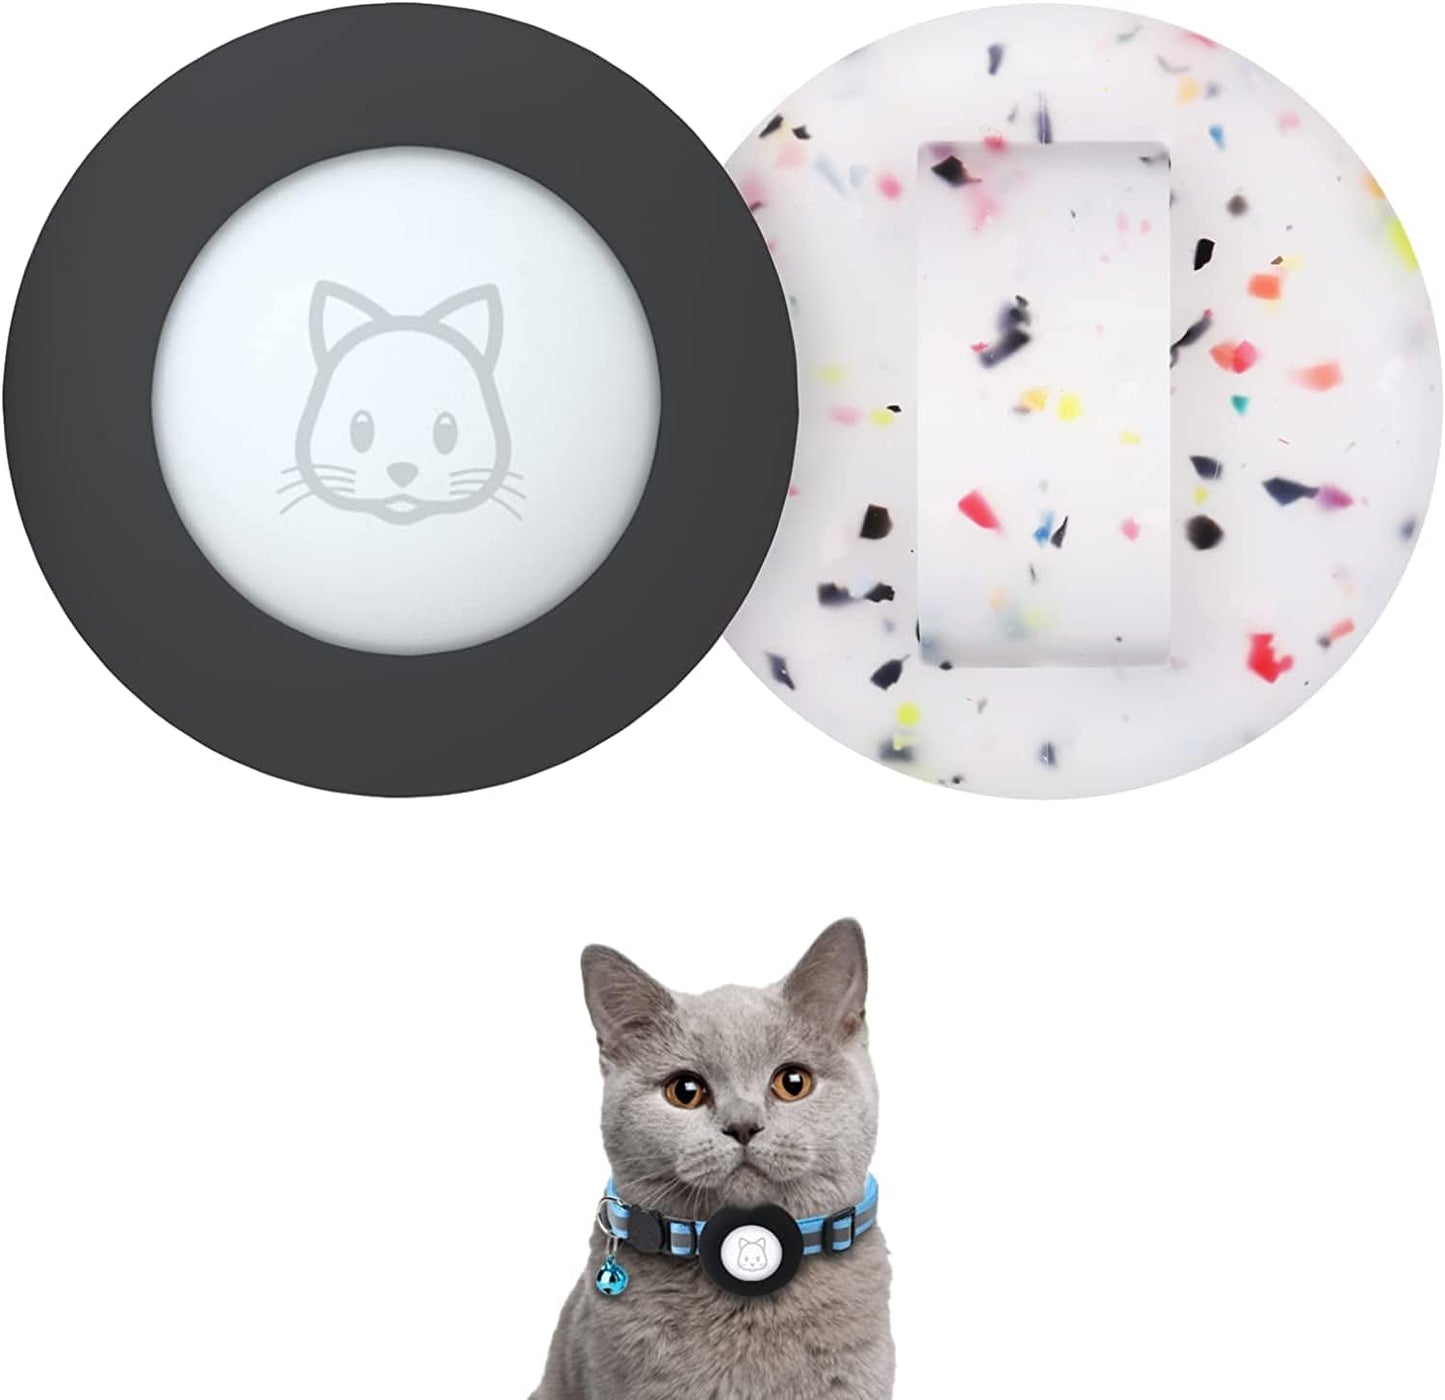 2022 Airtag Cat Collar Holder, Small Air Tag Cat Collar Holder Compatible with Apple Airtag GPS Tracker, 2Pack Waterproof Case Cover for Cat Dog Pet Collar within 3/8 Inch